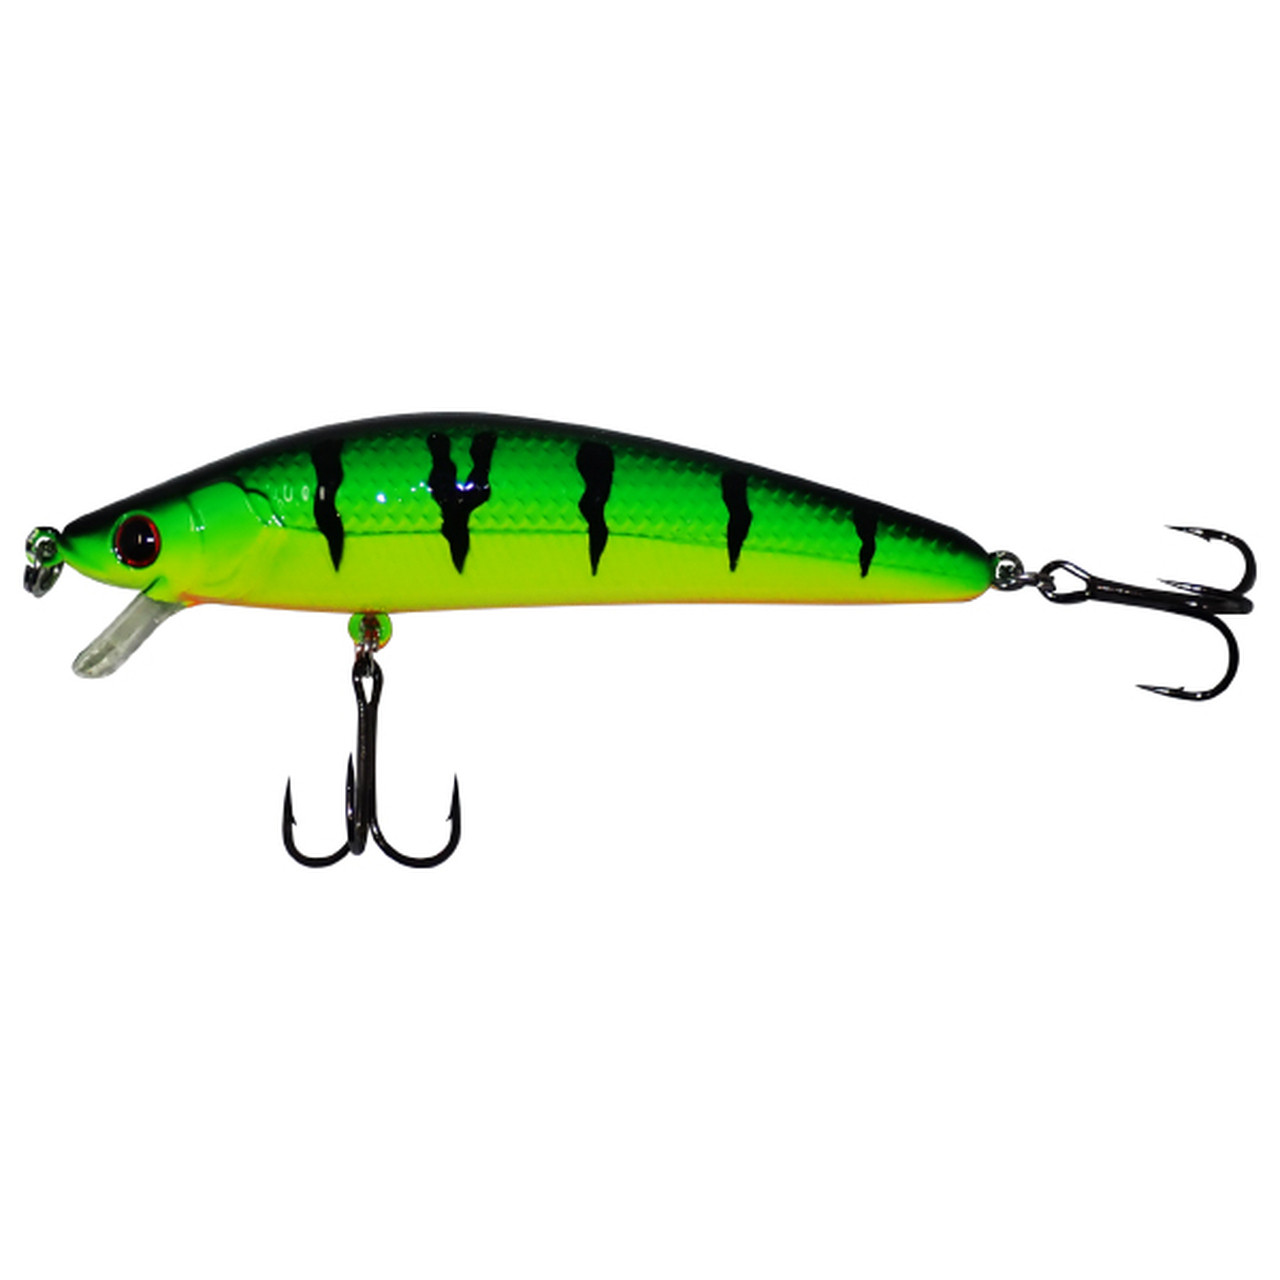 SteelShad Floater/Diver - Classic - 4 inch - Firetiger (Perch)